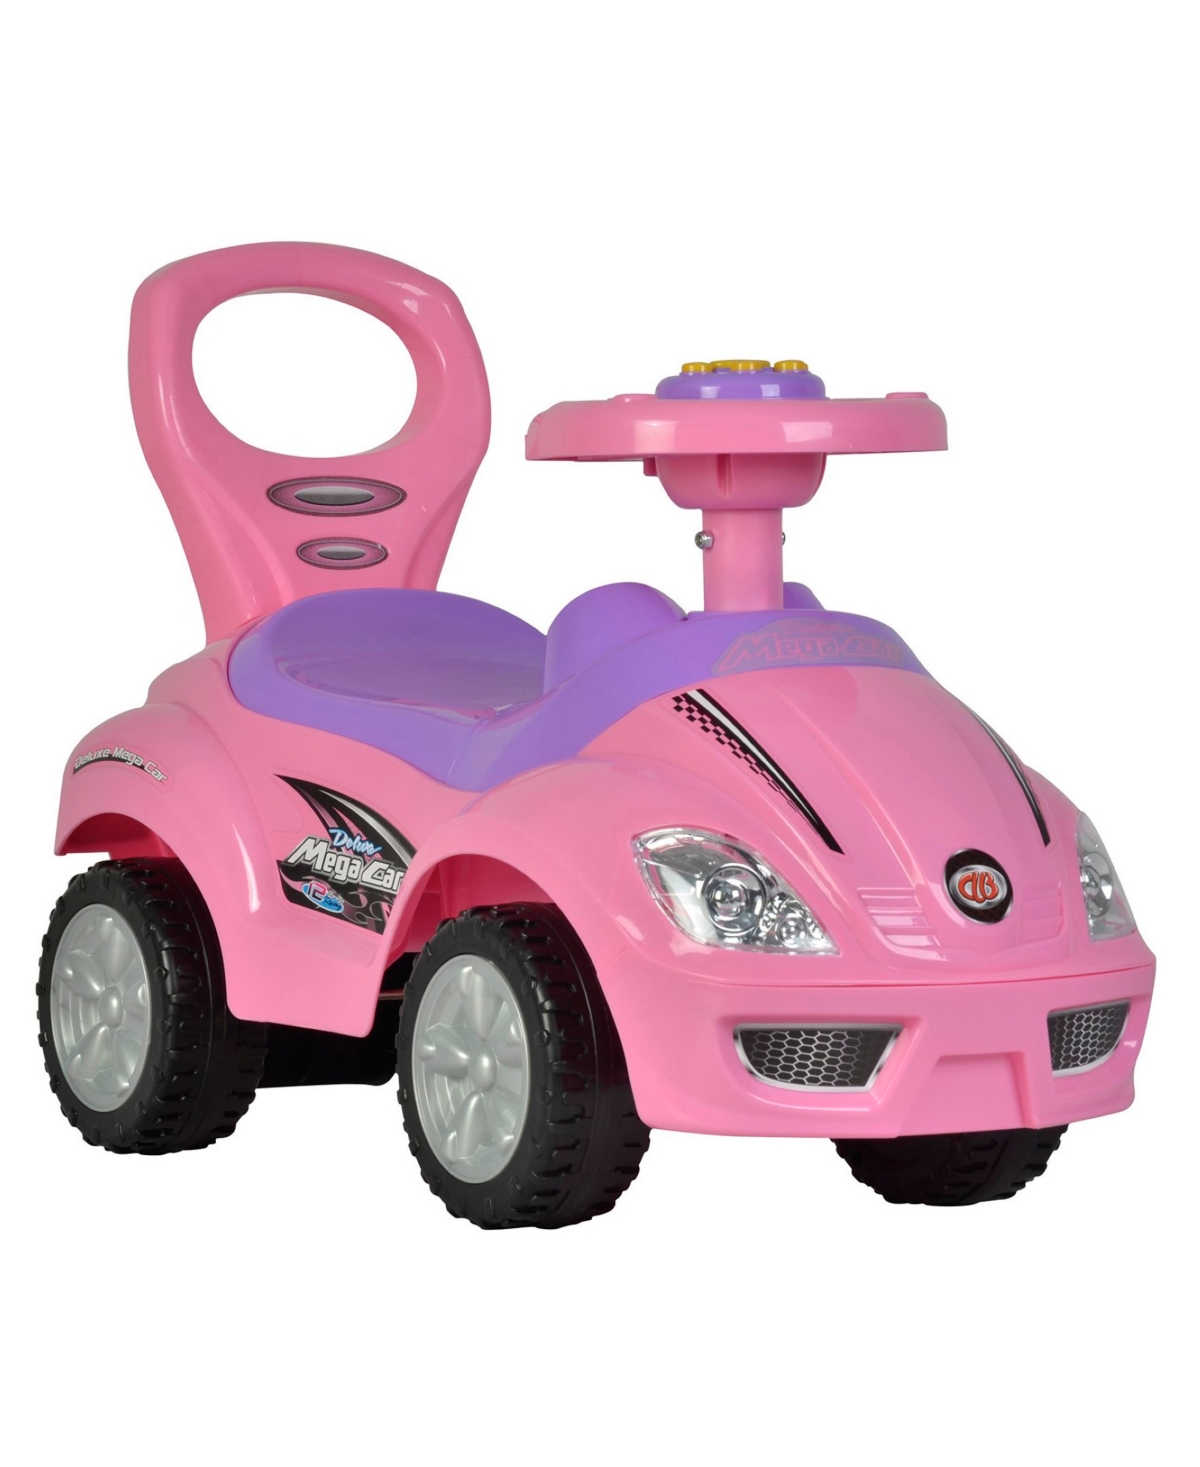 Freddo Kids' Toys Deluxe Push Ride-on In Pink